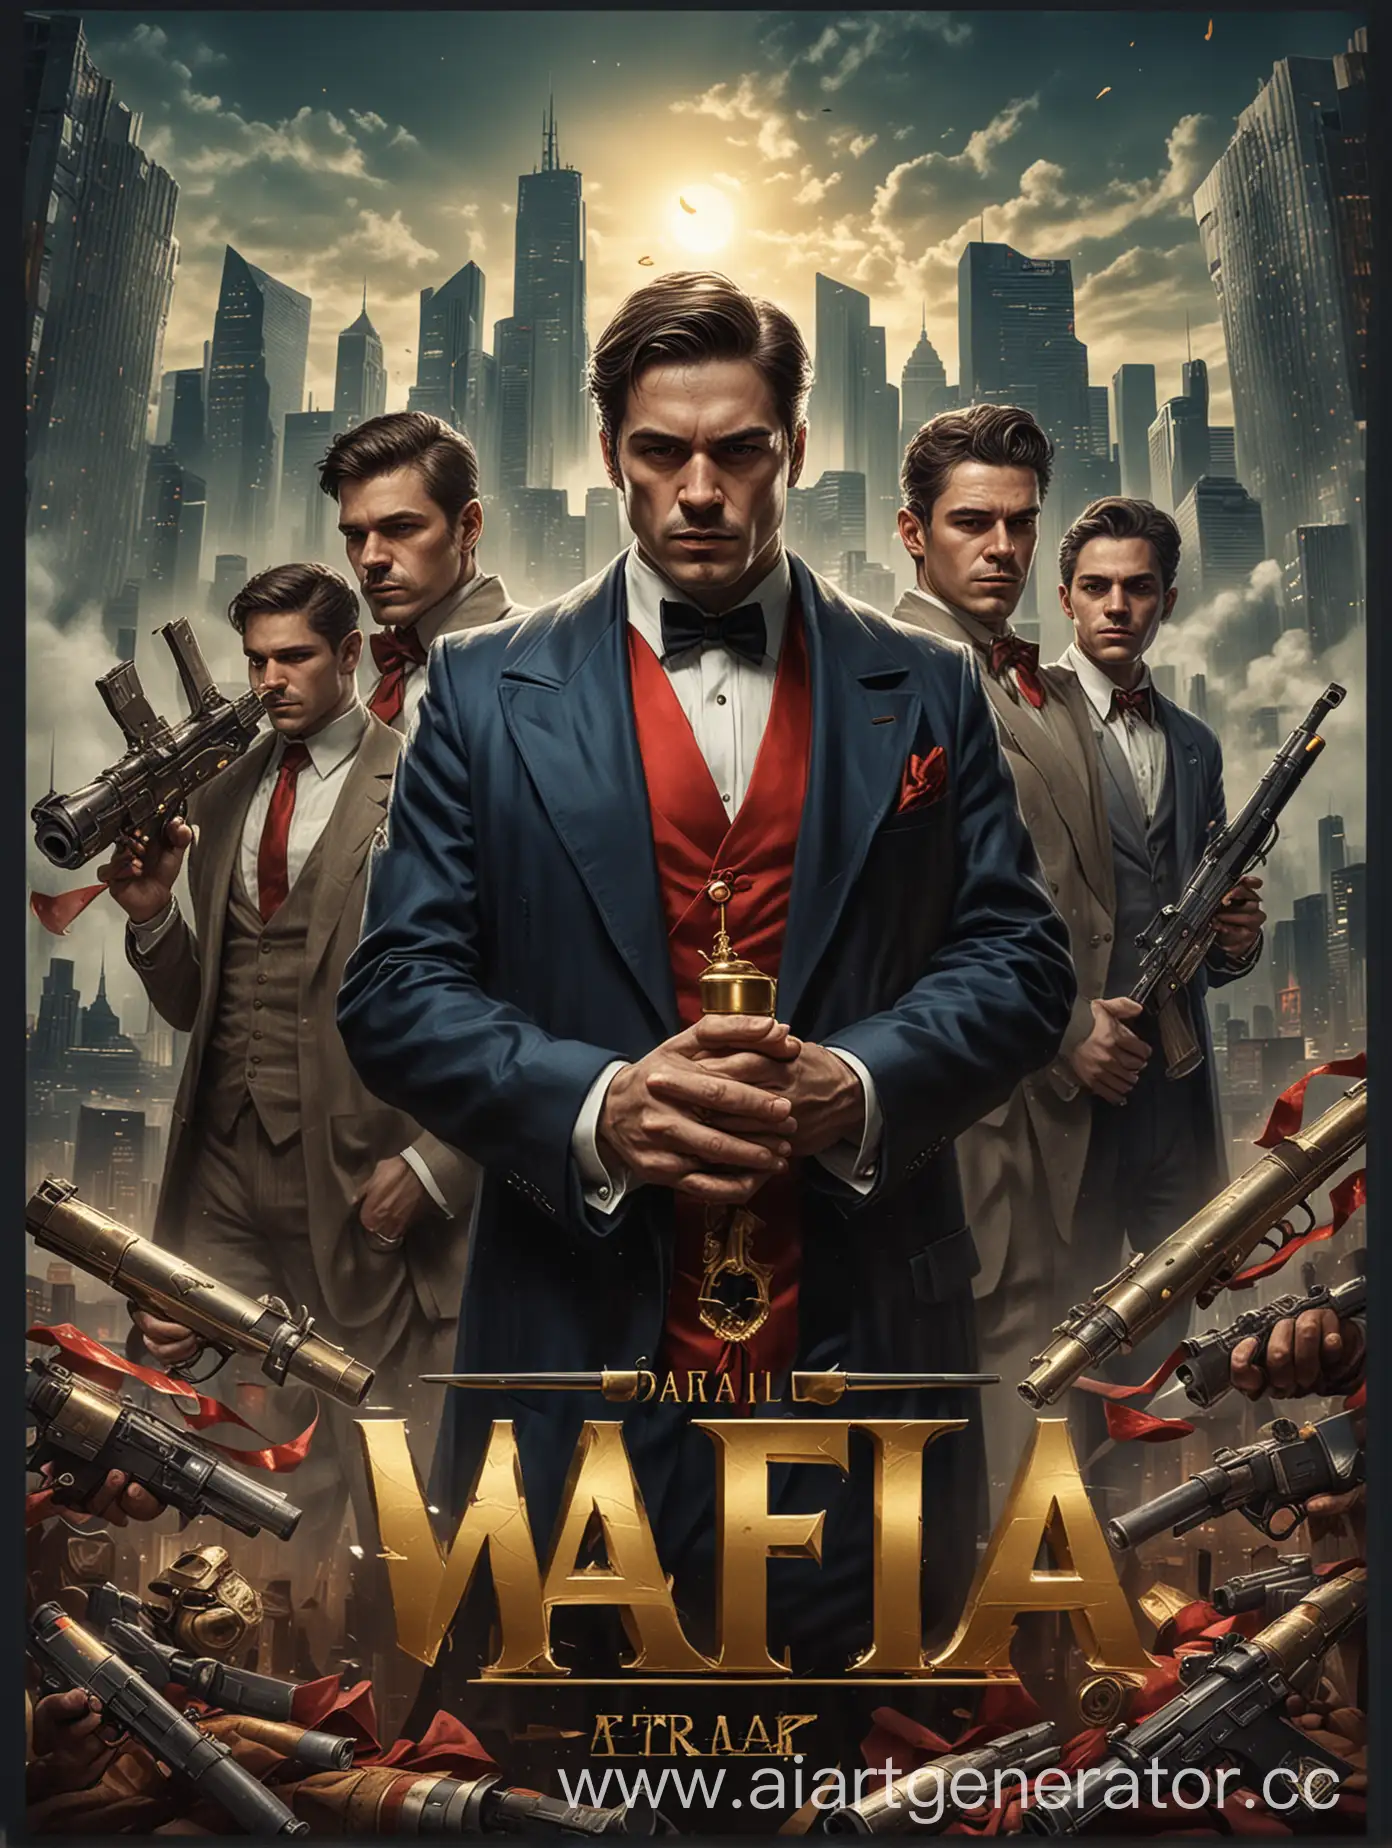 Modern-Cinematic-Poster-for-Mafia-Game-SRM-Golden-Chalice-and-Suited-Figures-with-Colt-Pistols